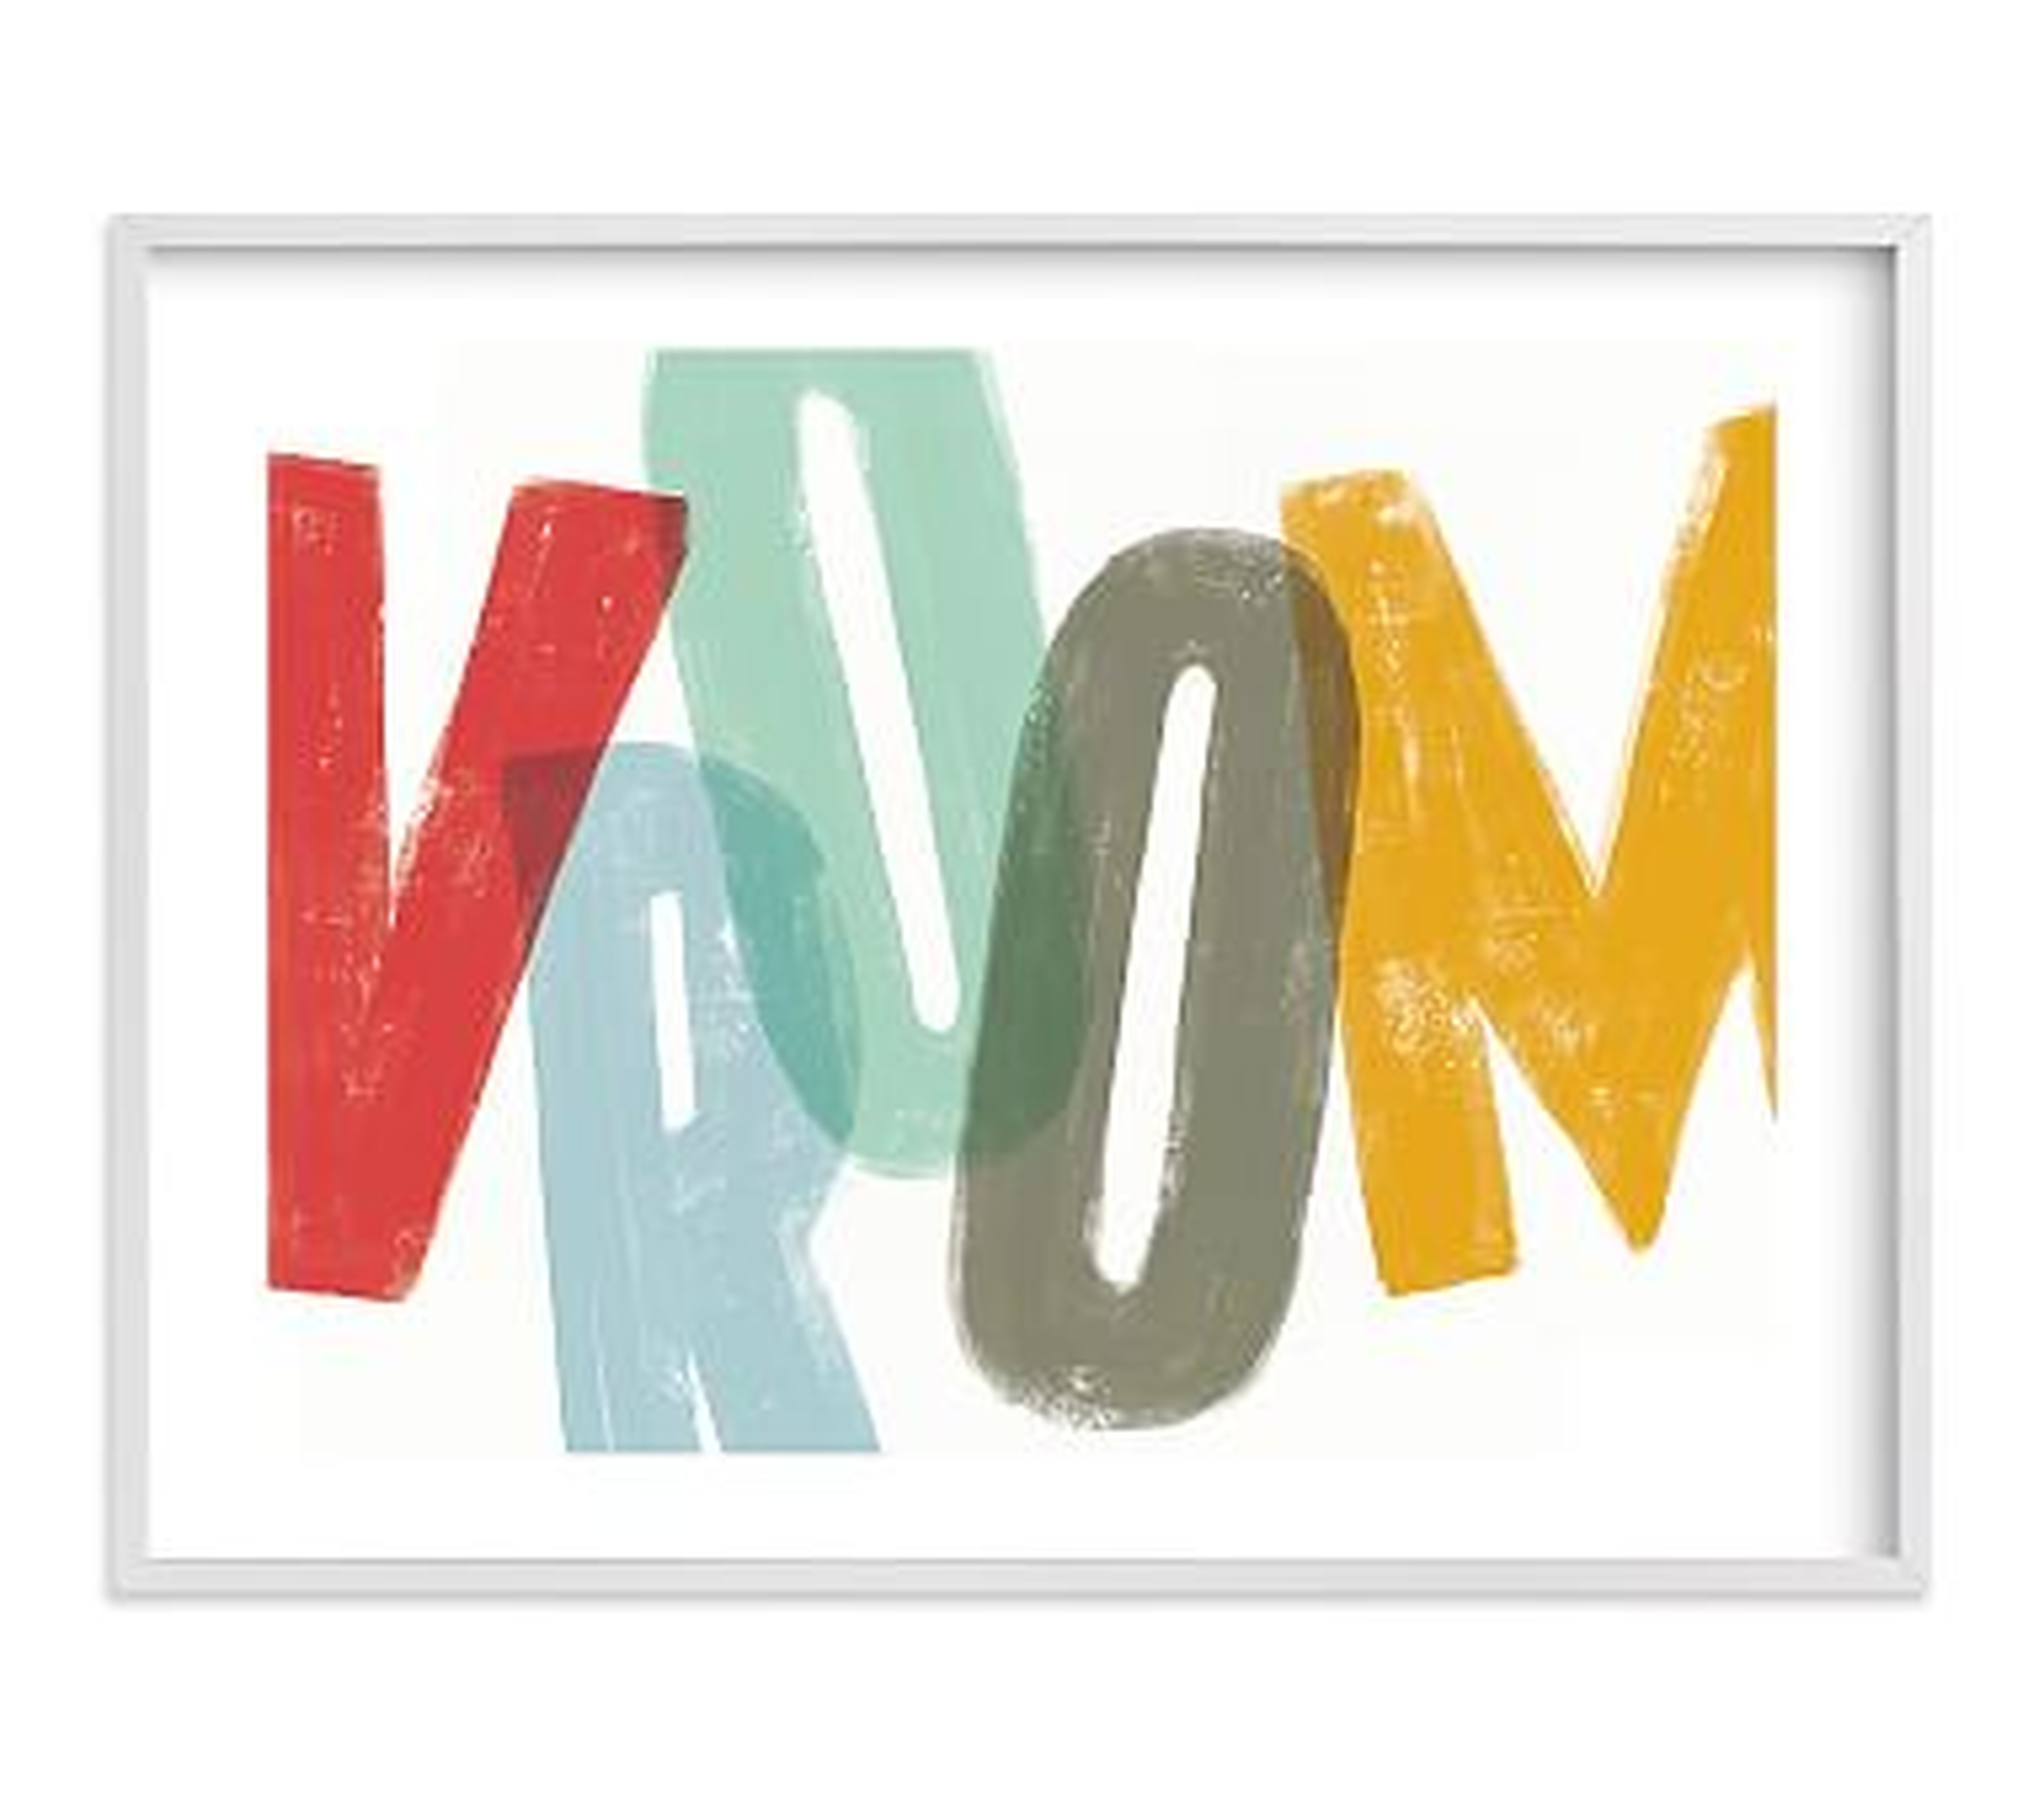 Vroom Wall Art by Minted(R), 40x30, White - Pottery Barn Kids